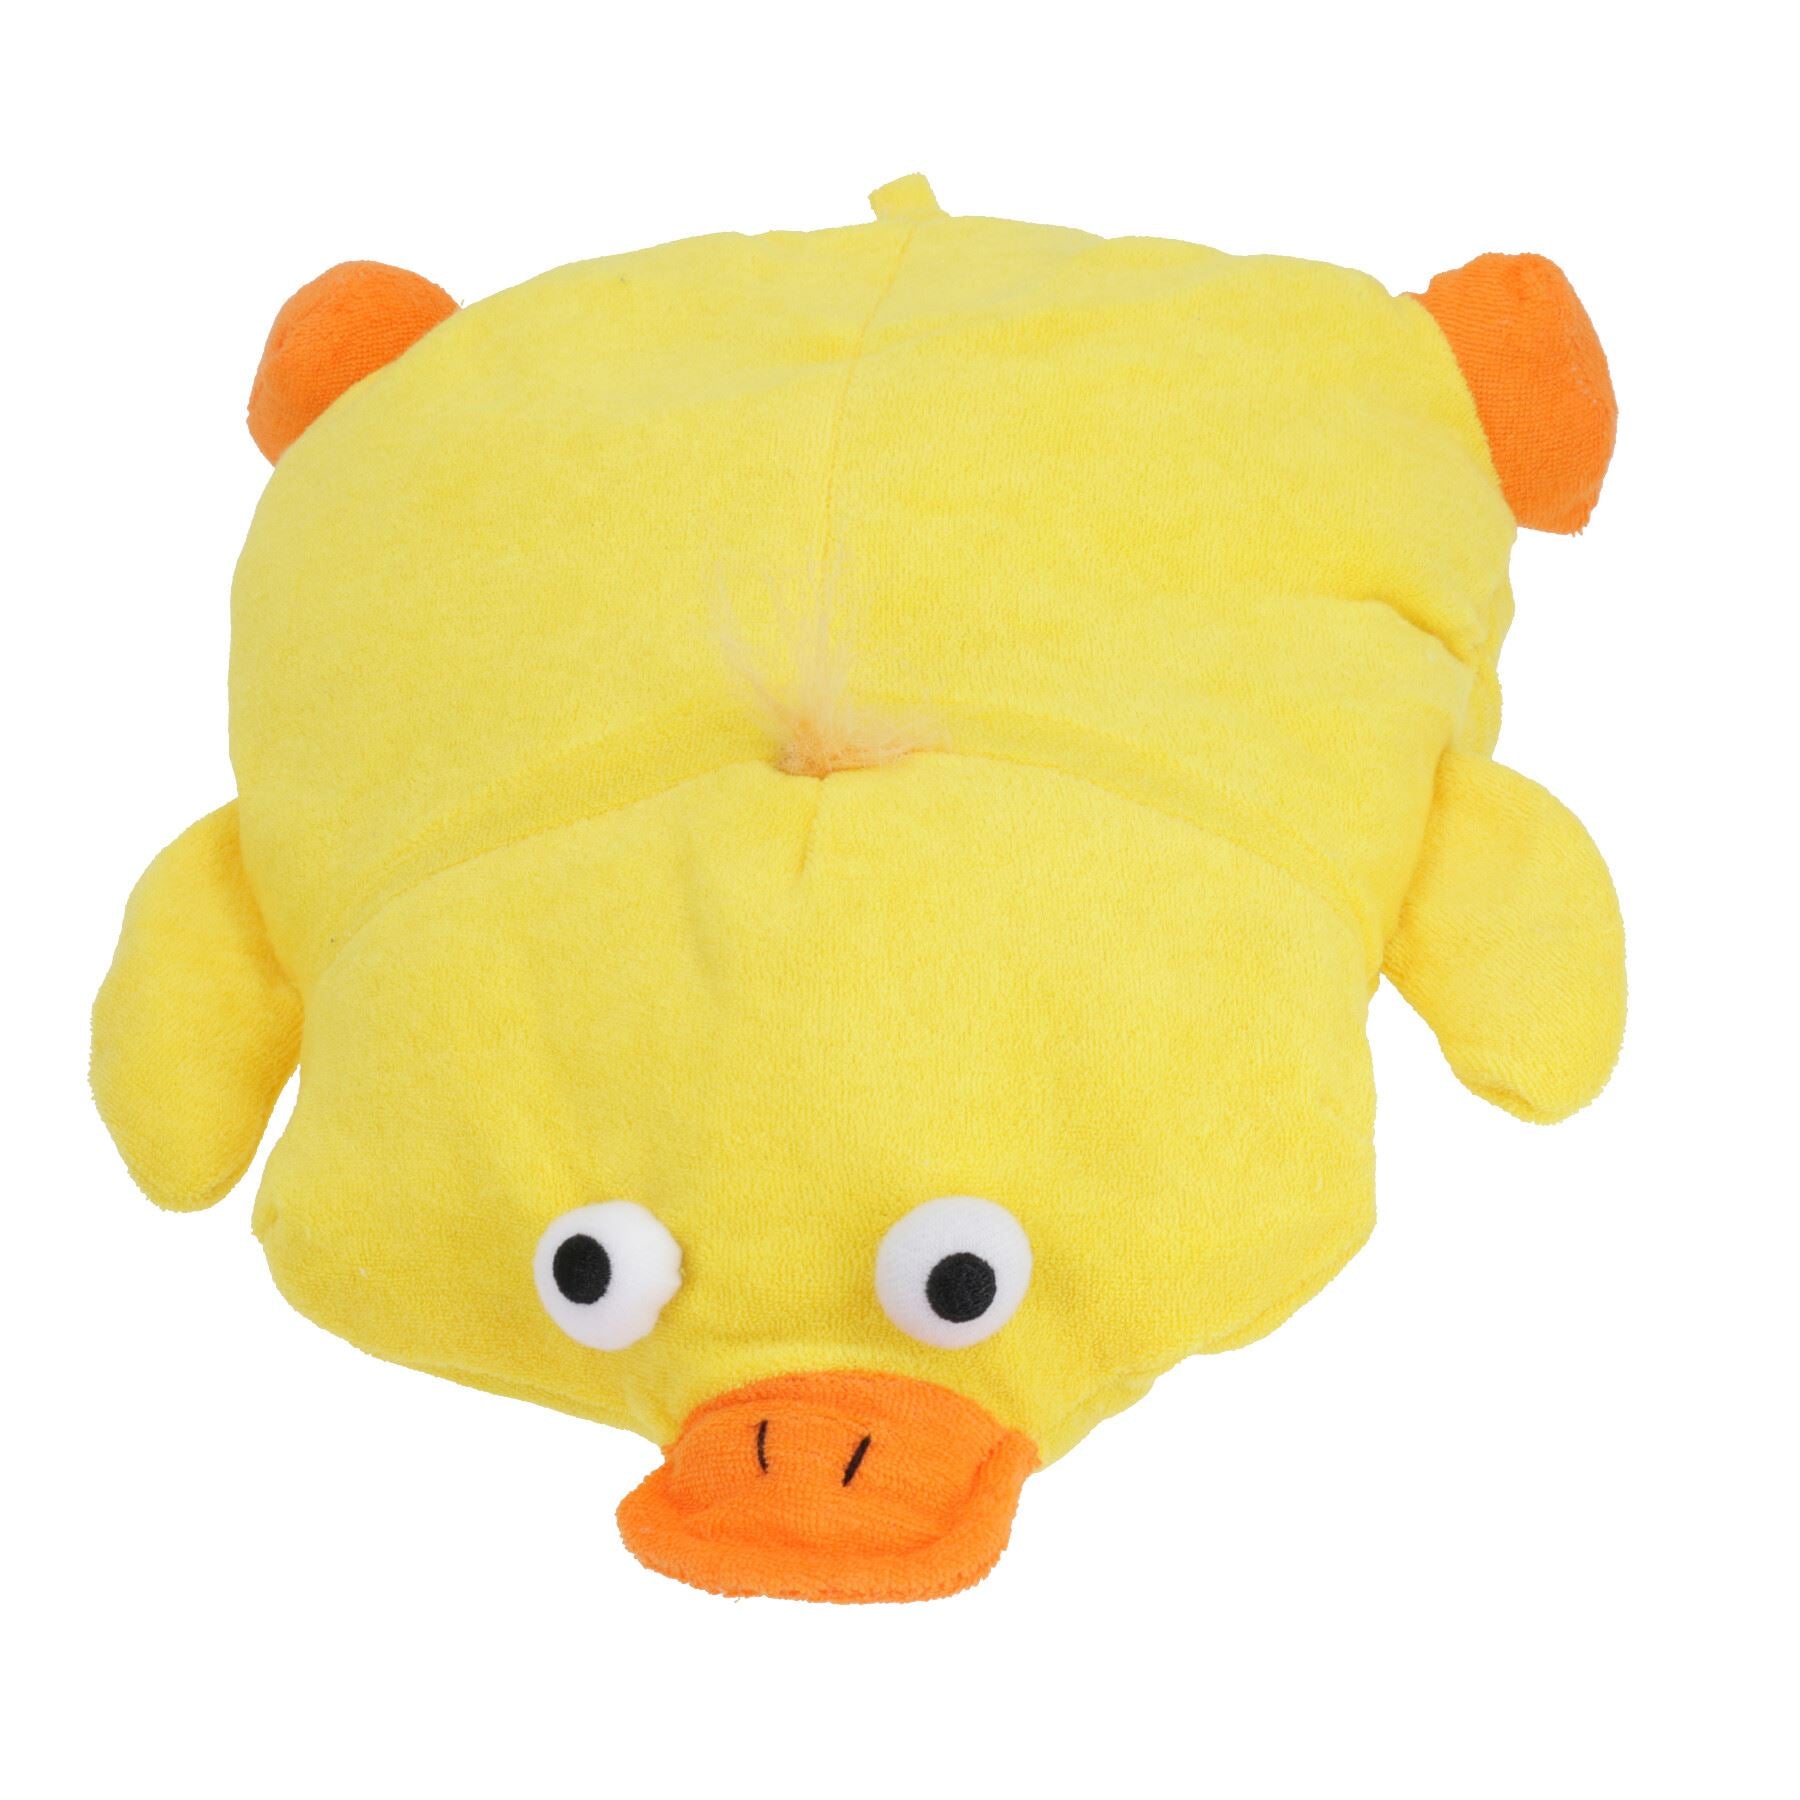 Yellow Duck Design Bath Pillow Cushion With Suction Pads Head / Neck Rest